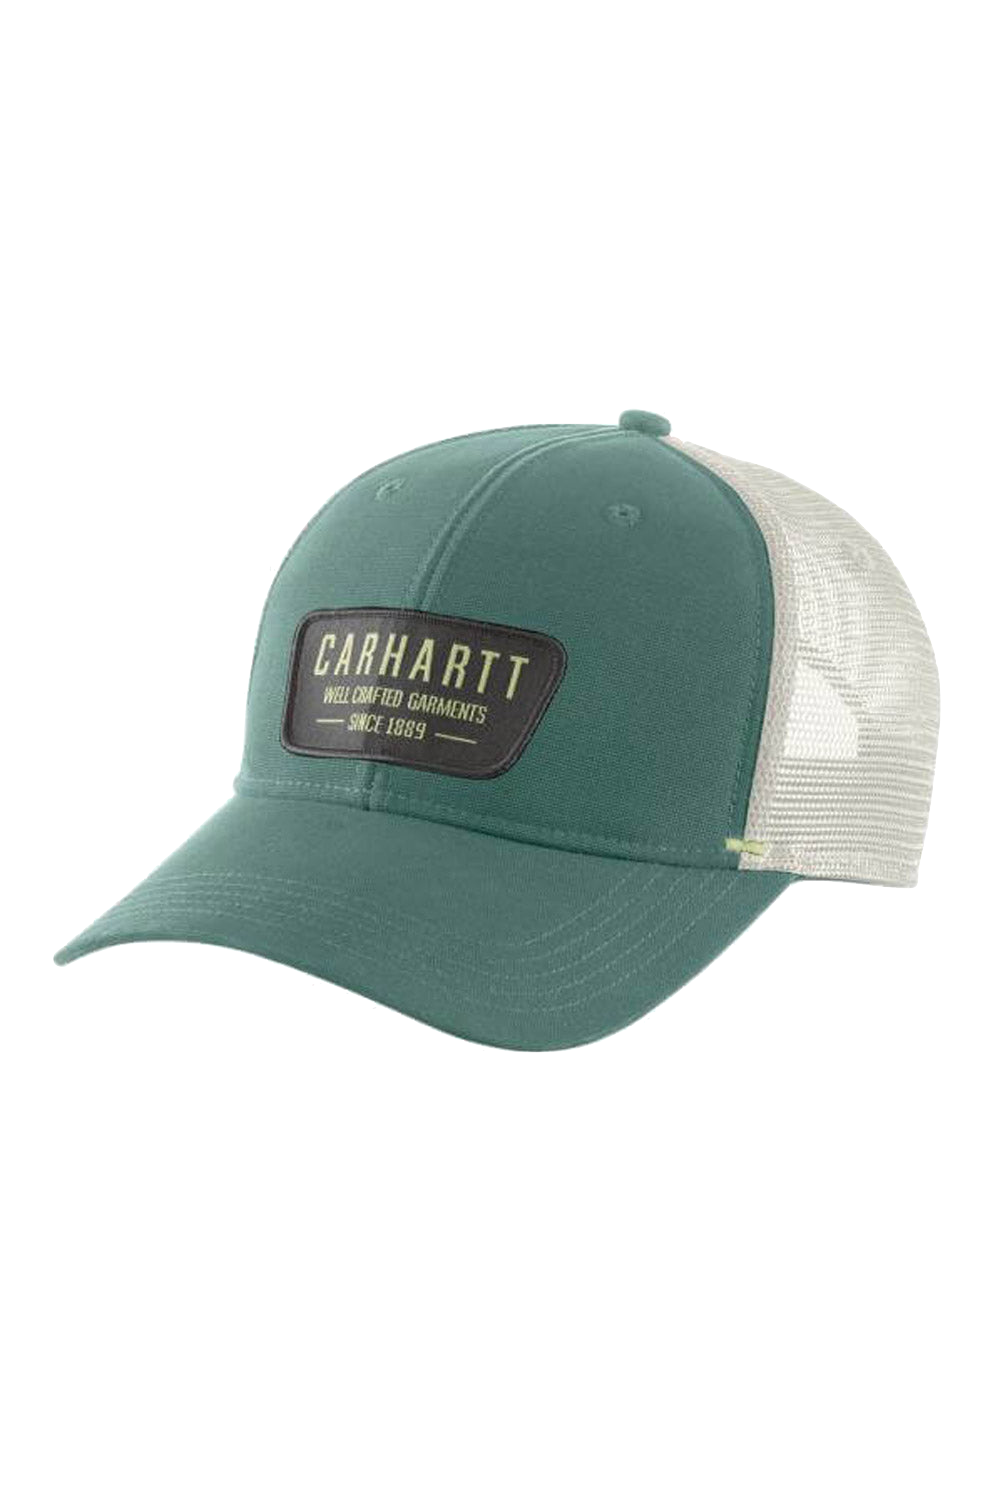 Carhartt Canvas Mesh-Back Crafted Patch Cap Trucker Hat 105452